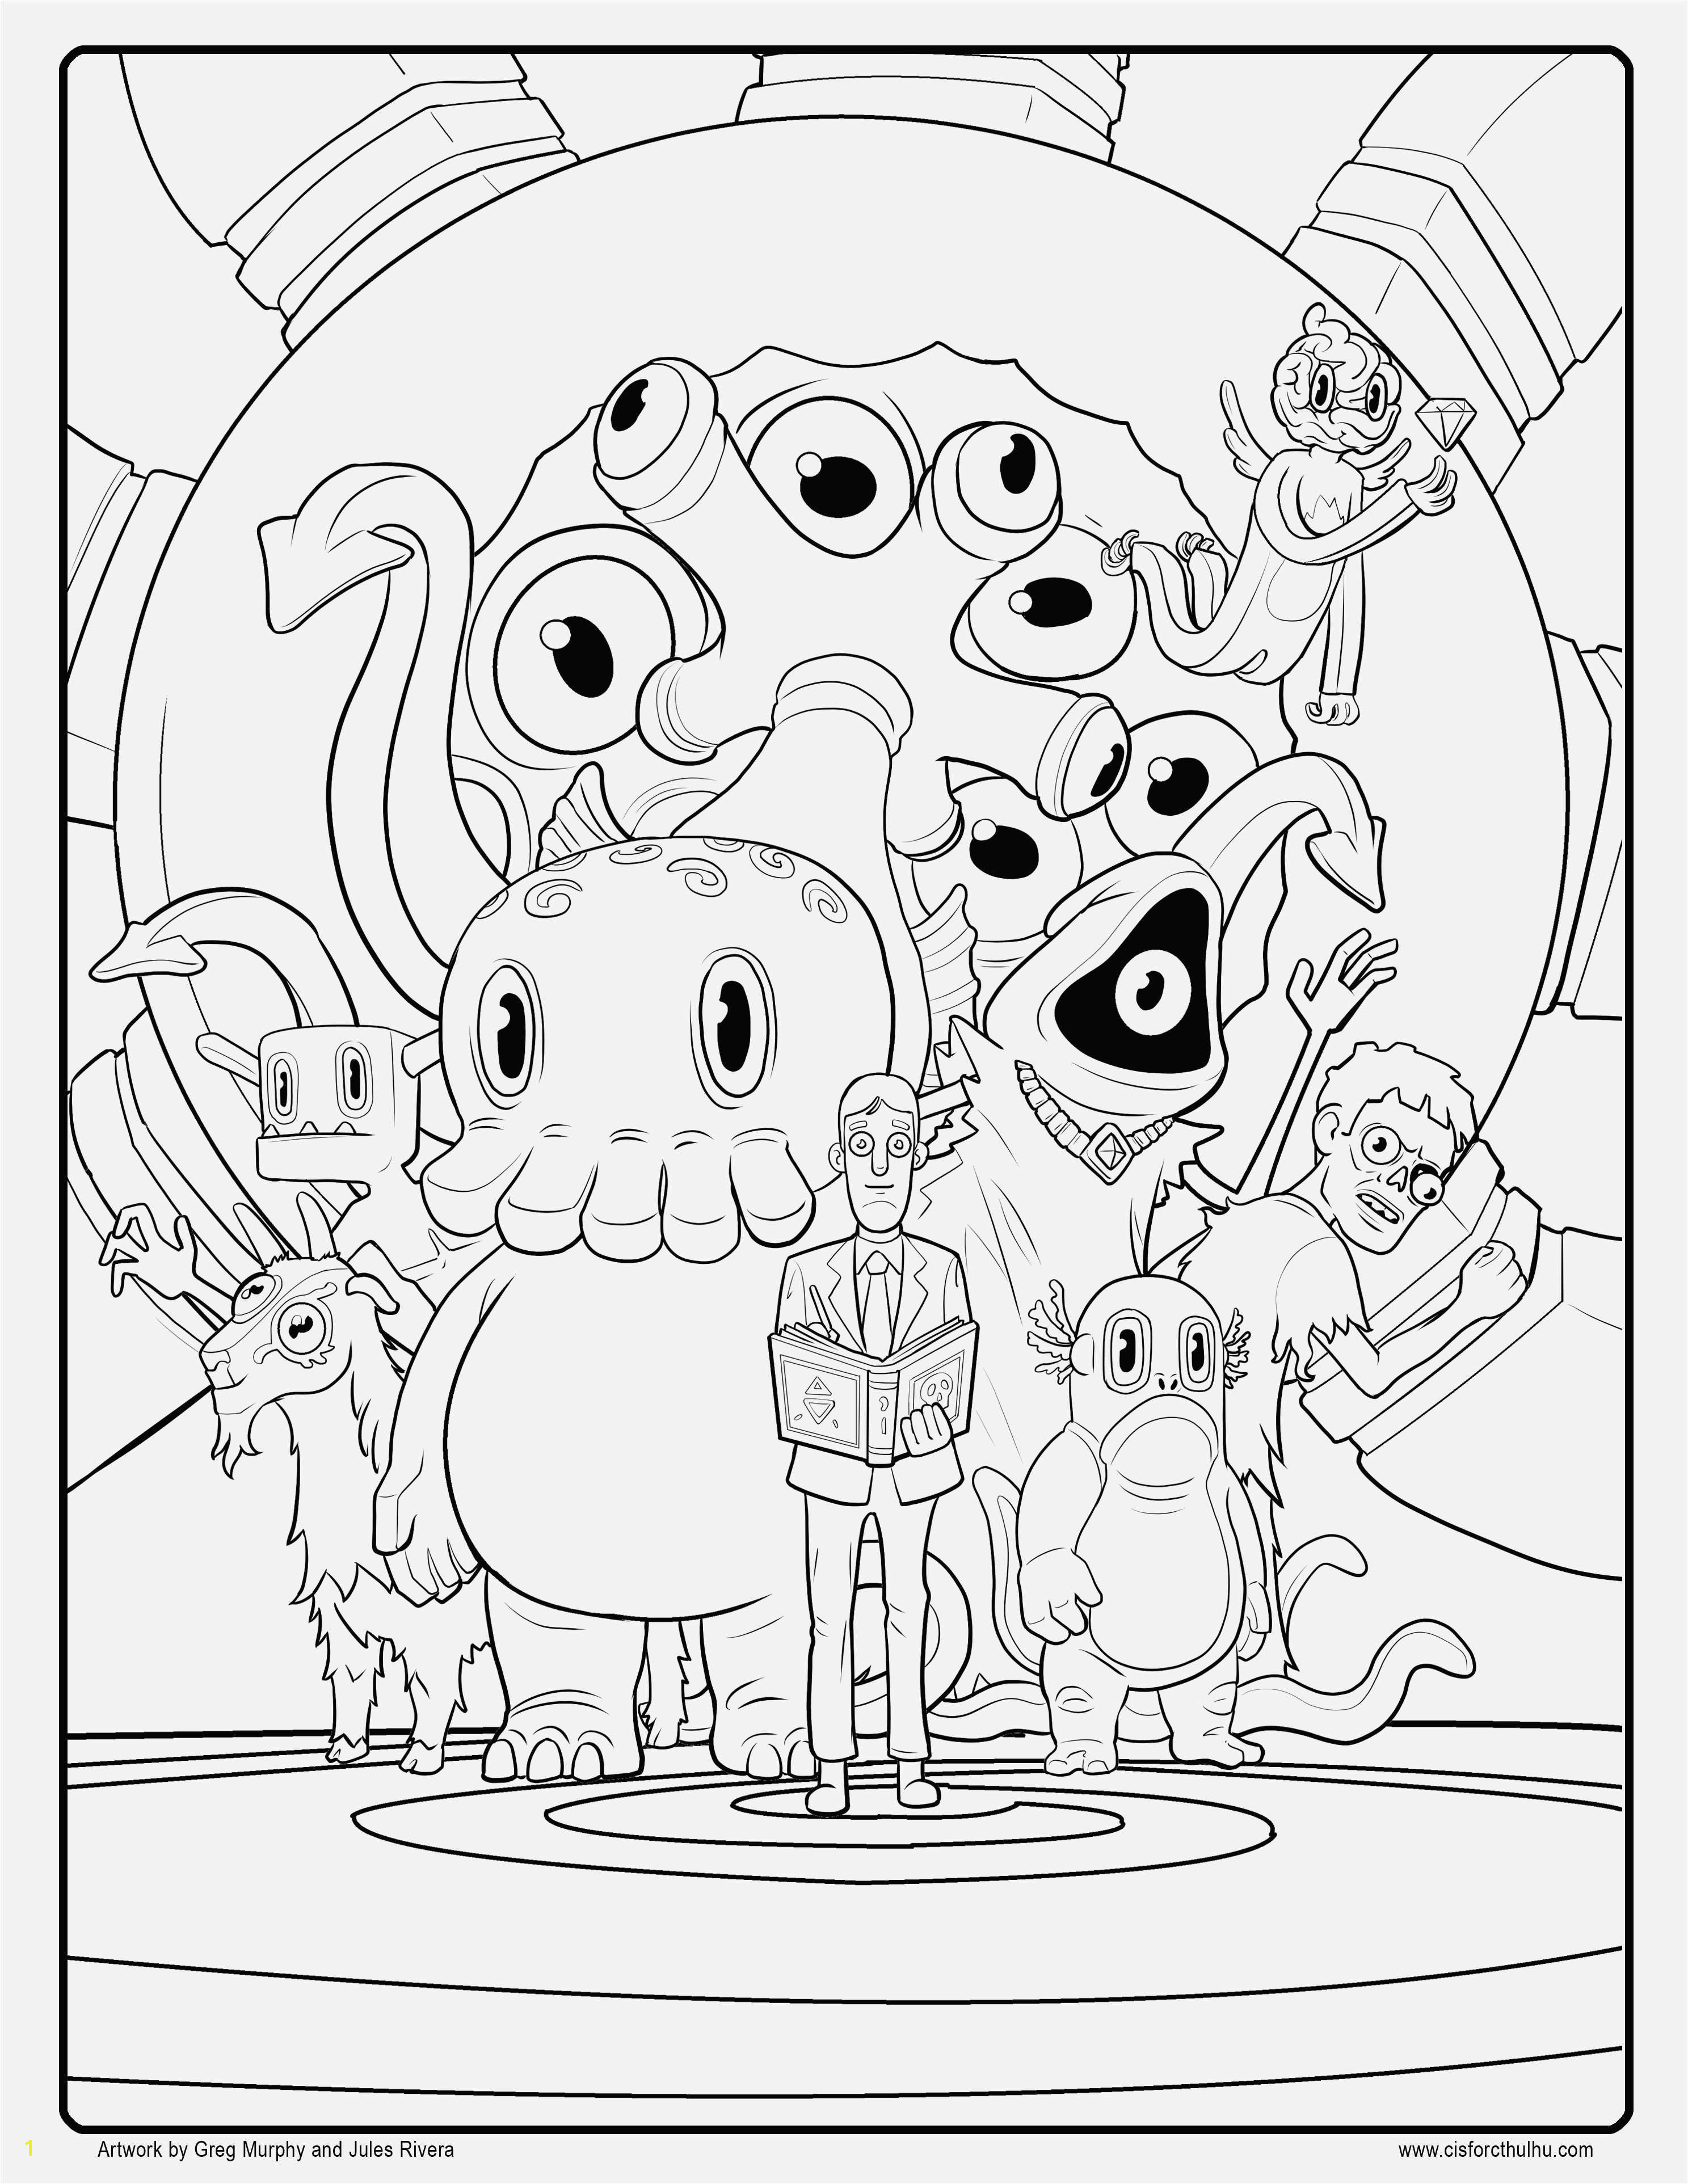 Printable Number Coloring Pages Luxury Free Coloring Pages Animals Printable Awesome Cool Coloring Page